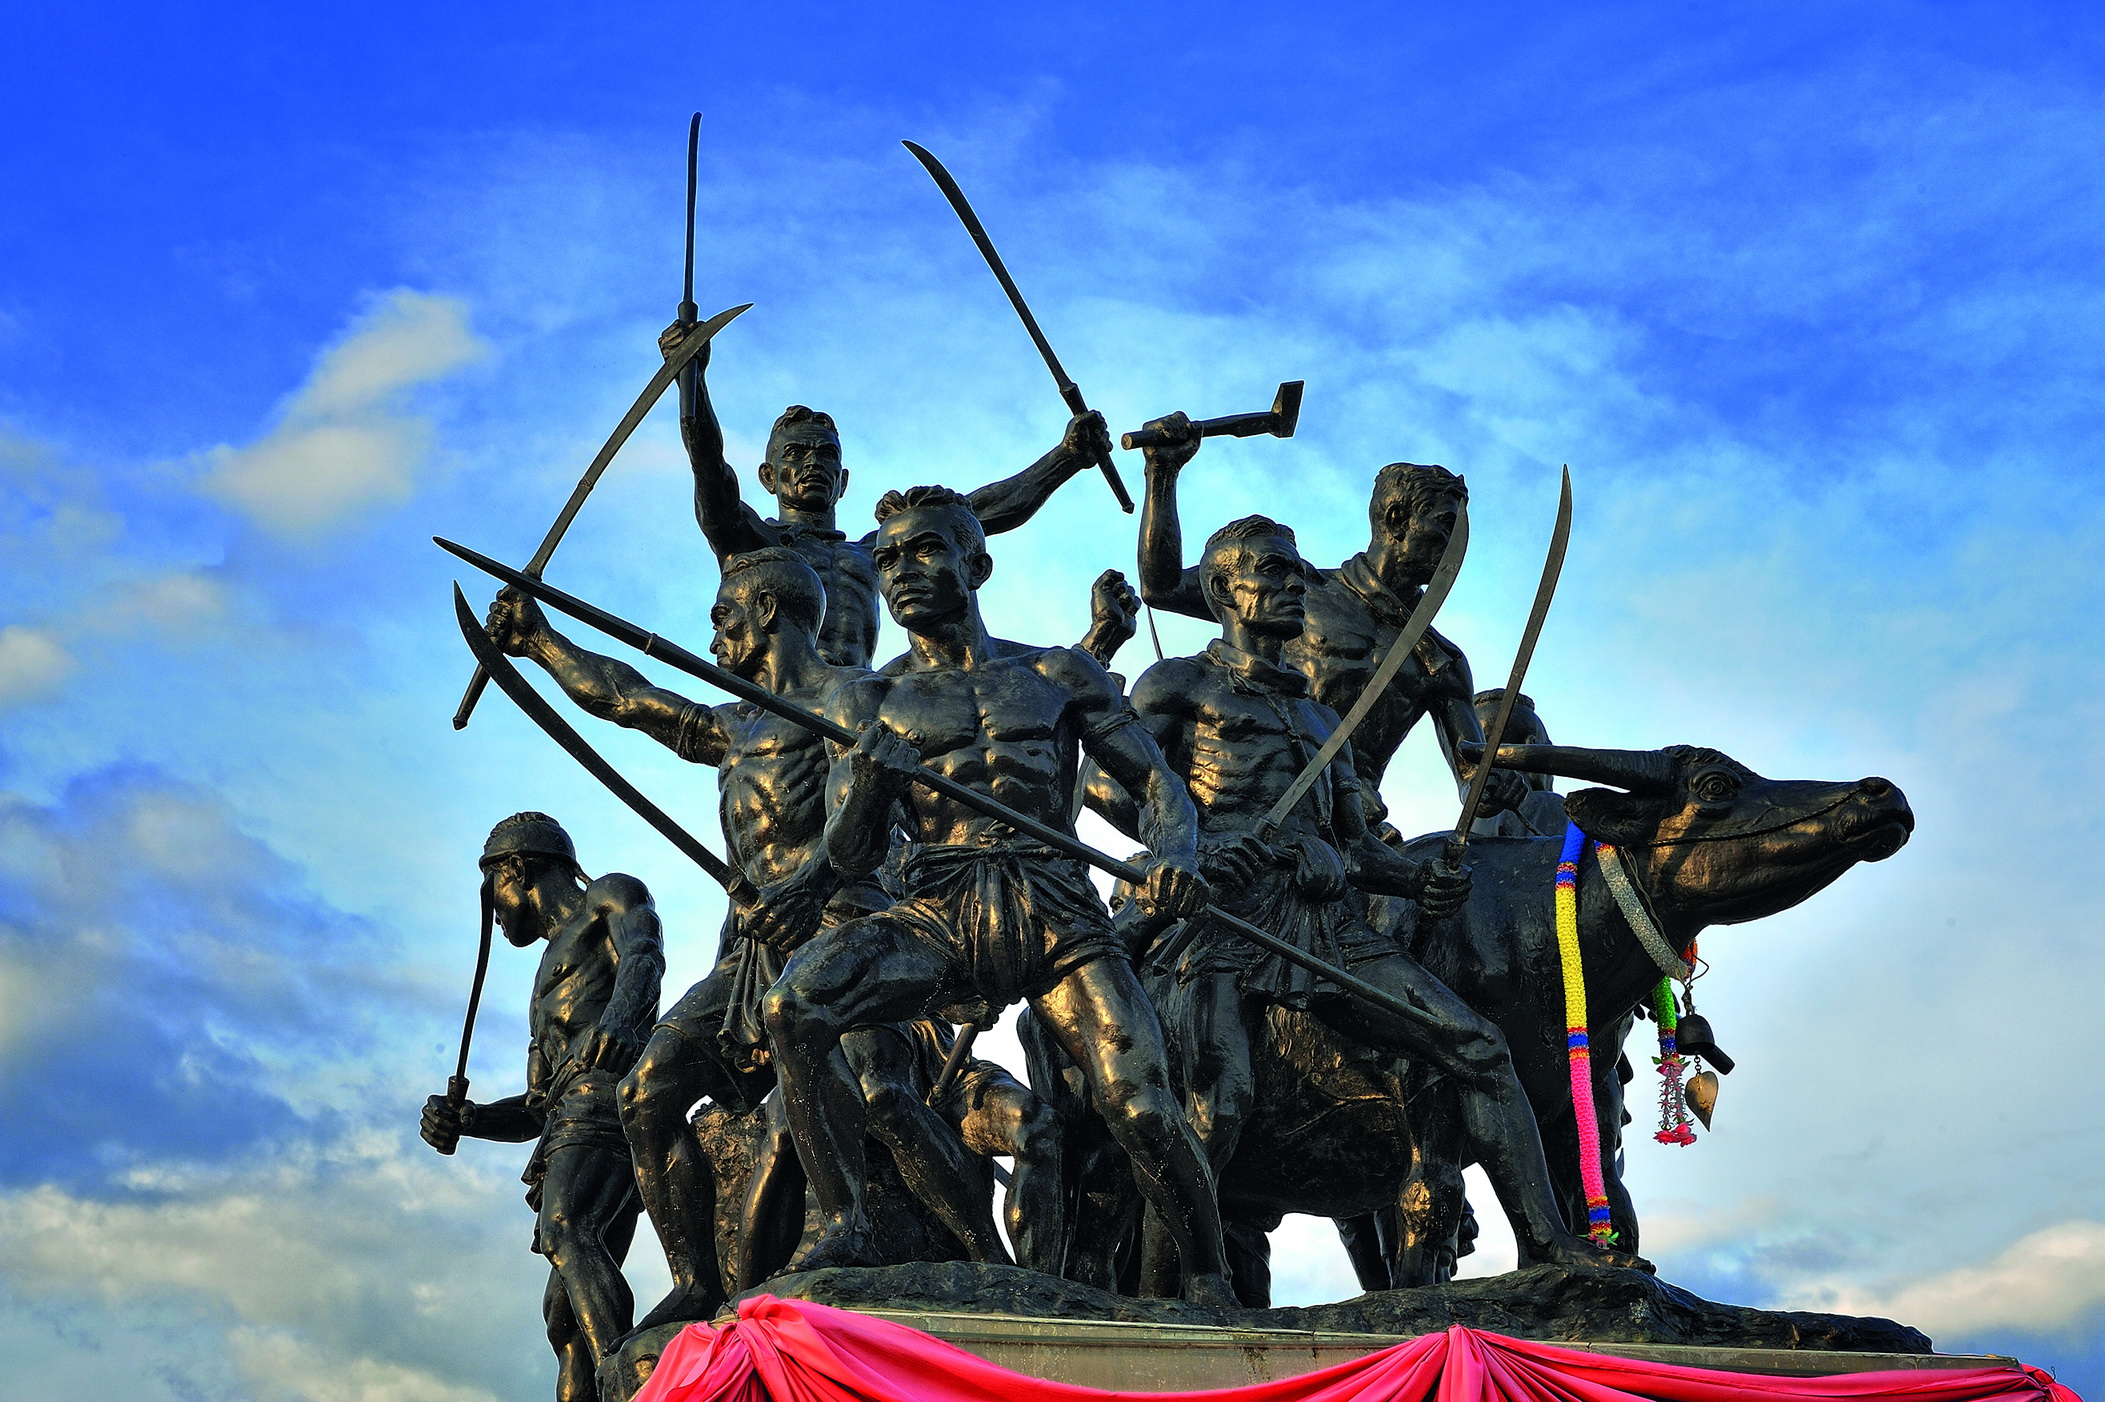 Monument to the Heroes of Bang Rachan in Sing Buri Province, Thailand.